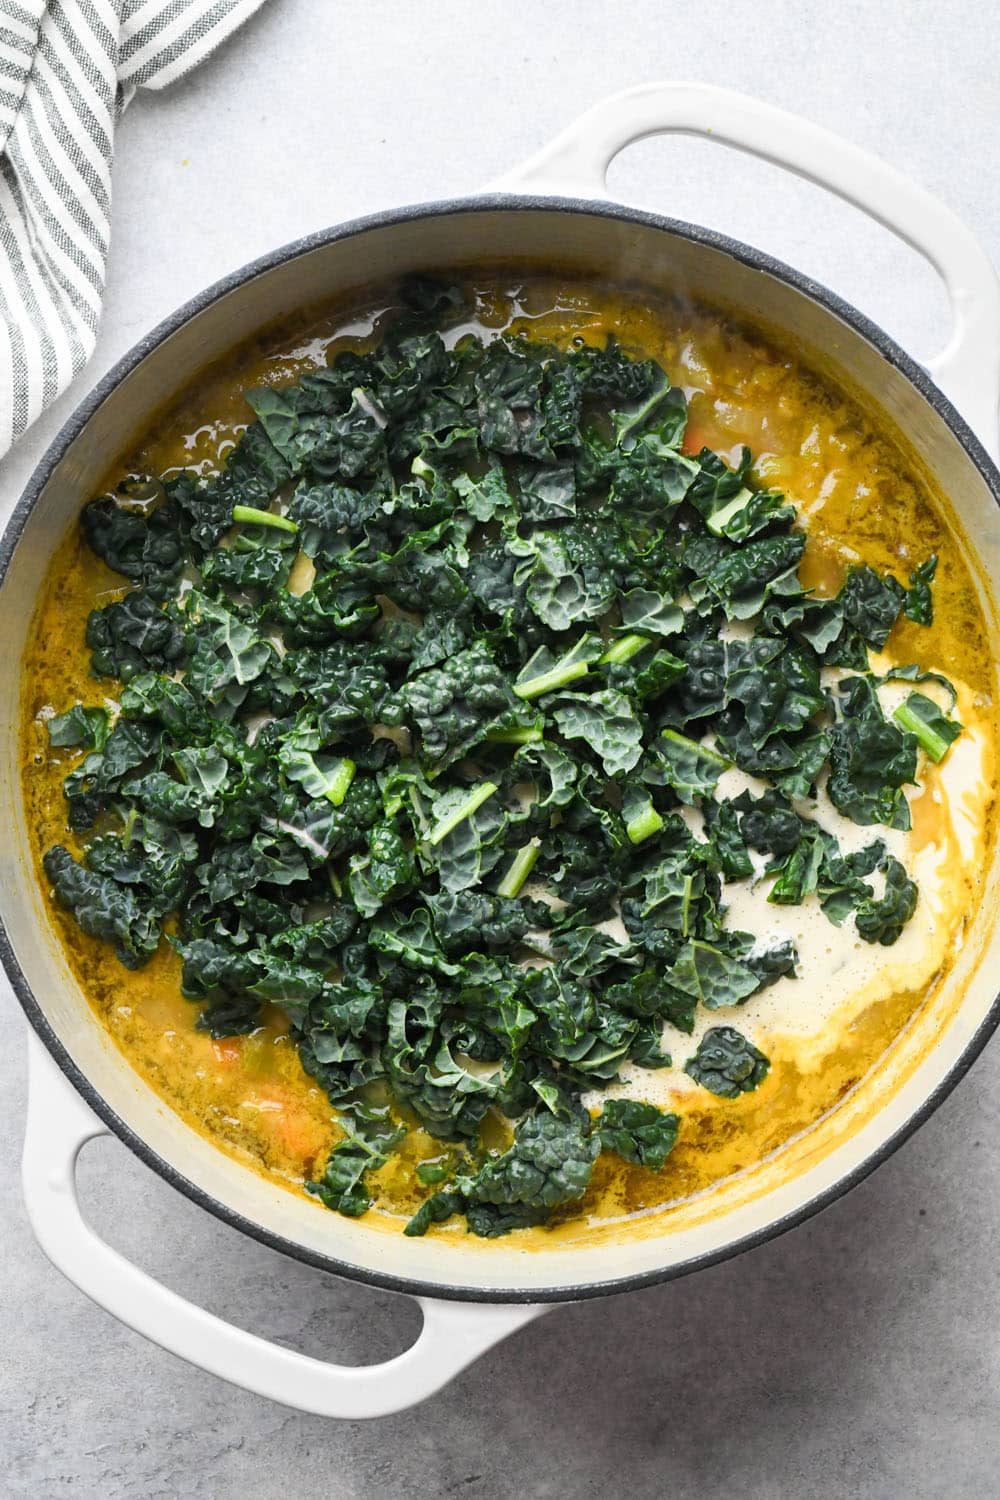 How to make White Bean and Kale Soup: Raw kale added to the soup.